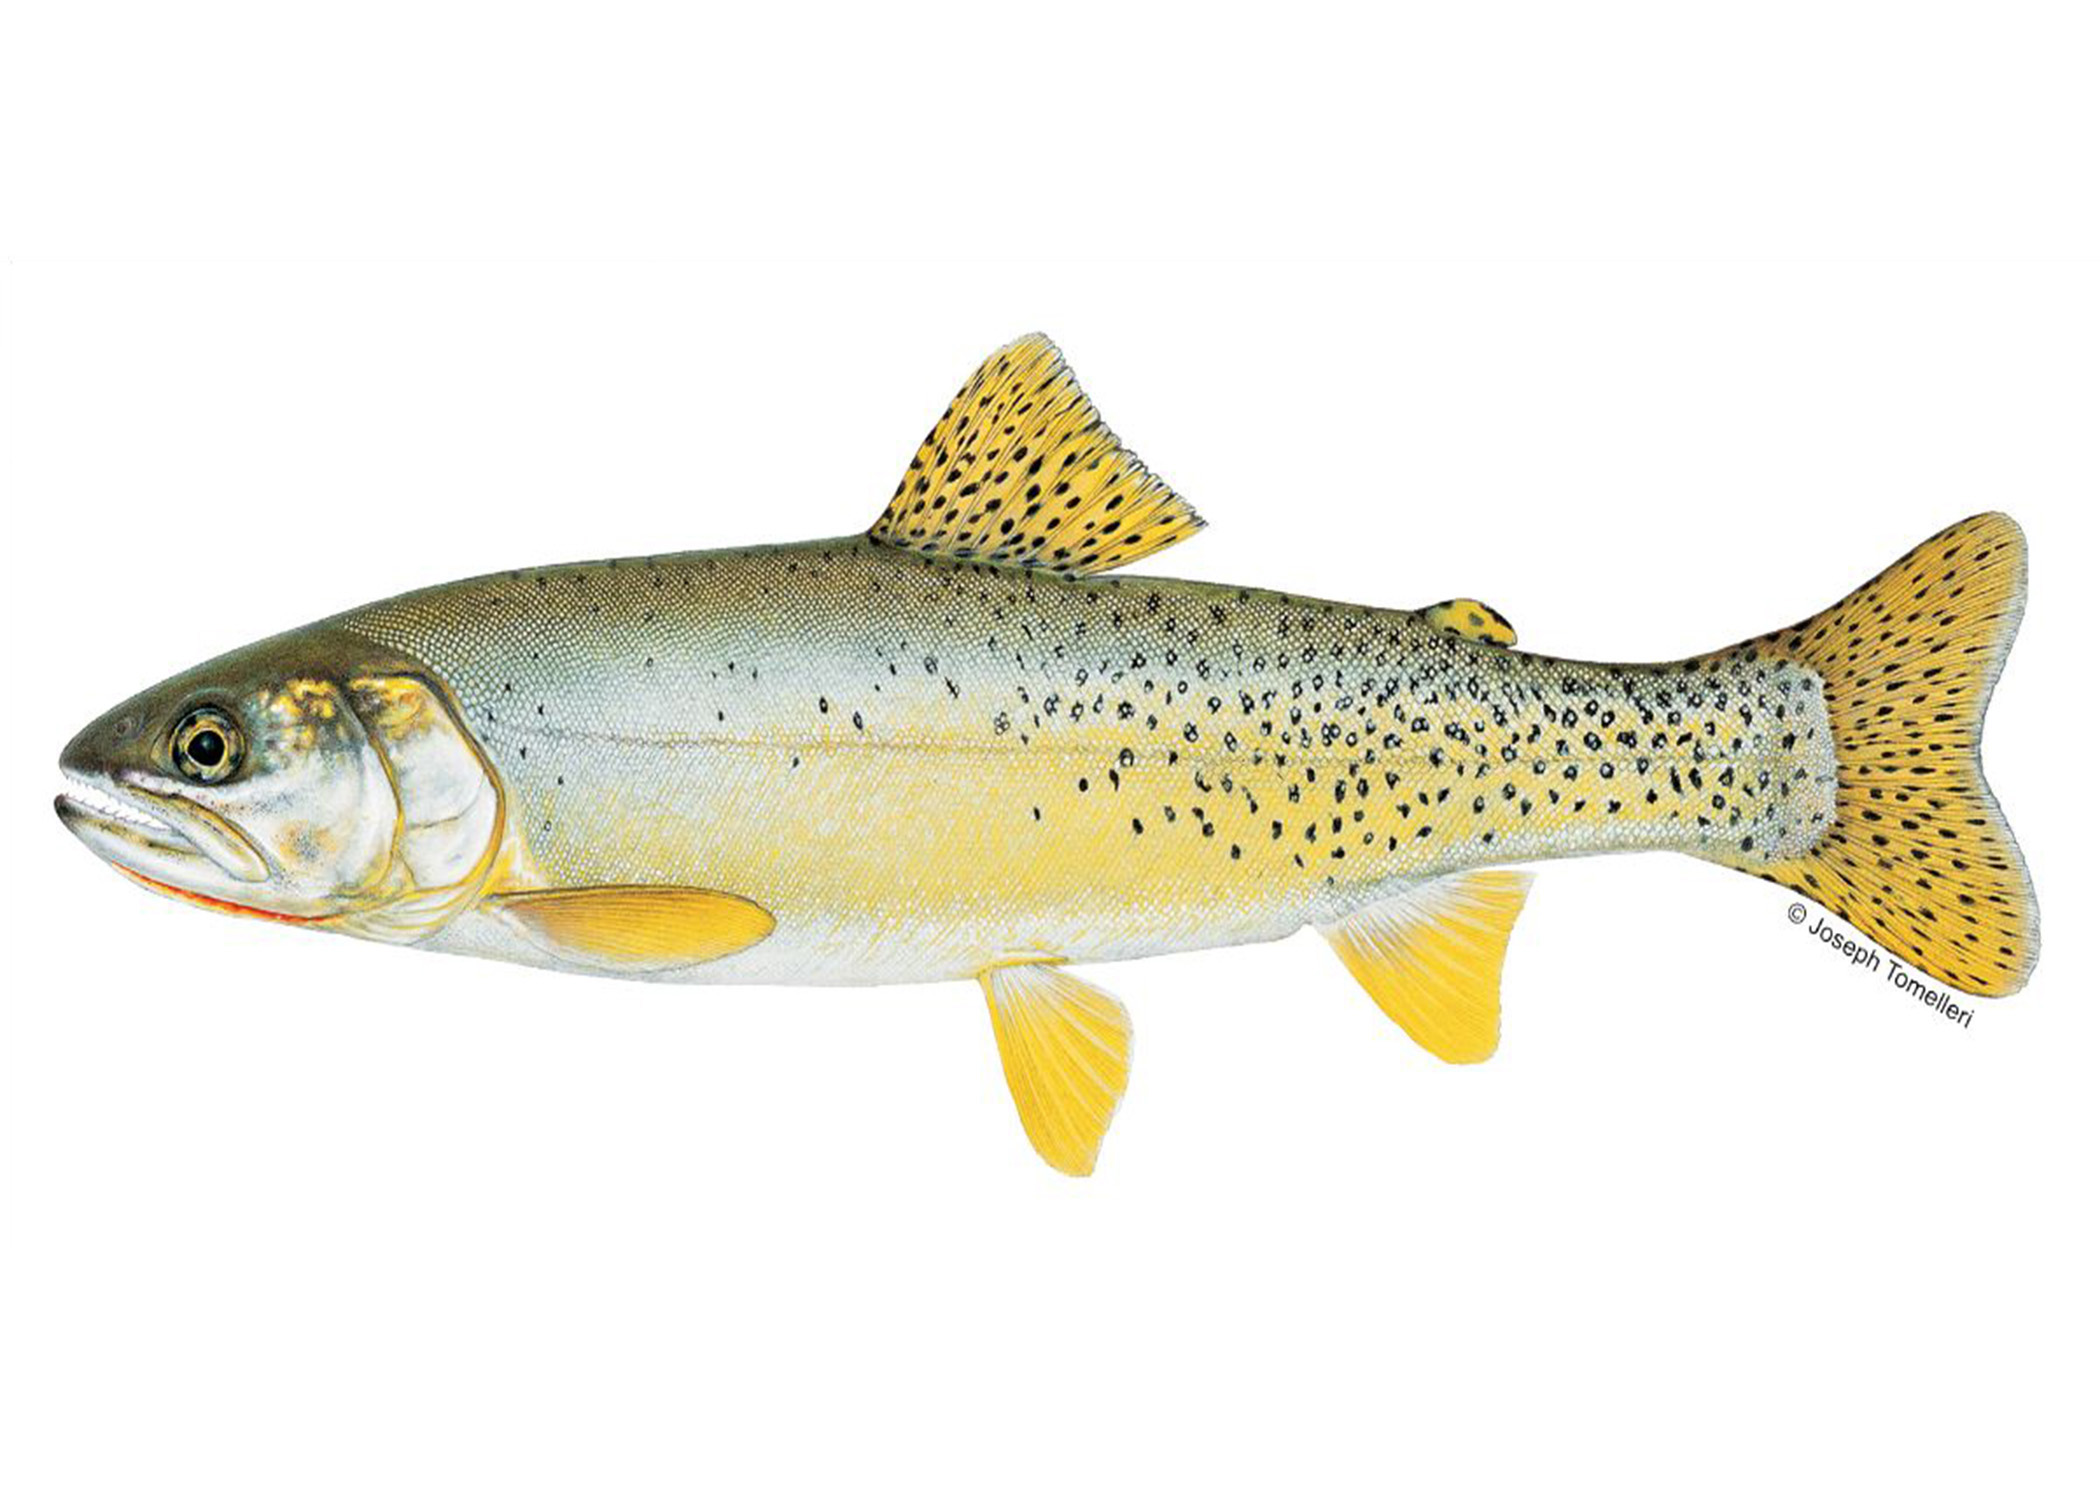 Yellowfin Cutthroat Trout Went Extinct in Colorado 120 Years Ago. But Now Researchers are Hoping to Rediscover Them